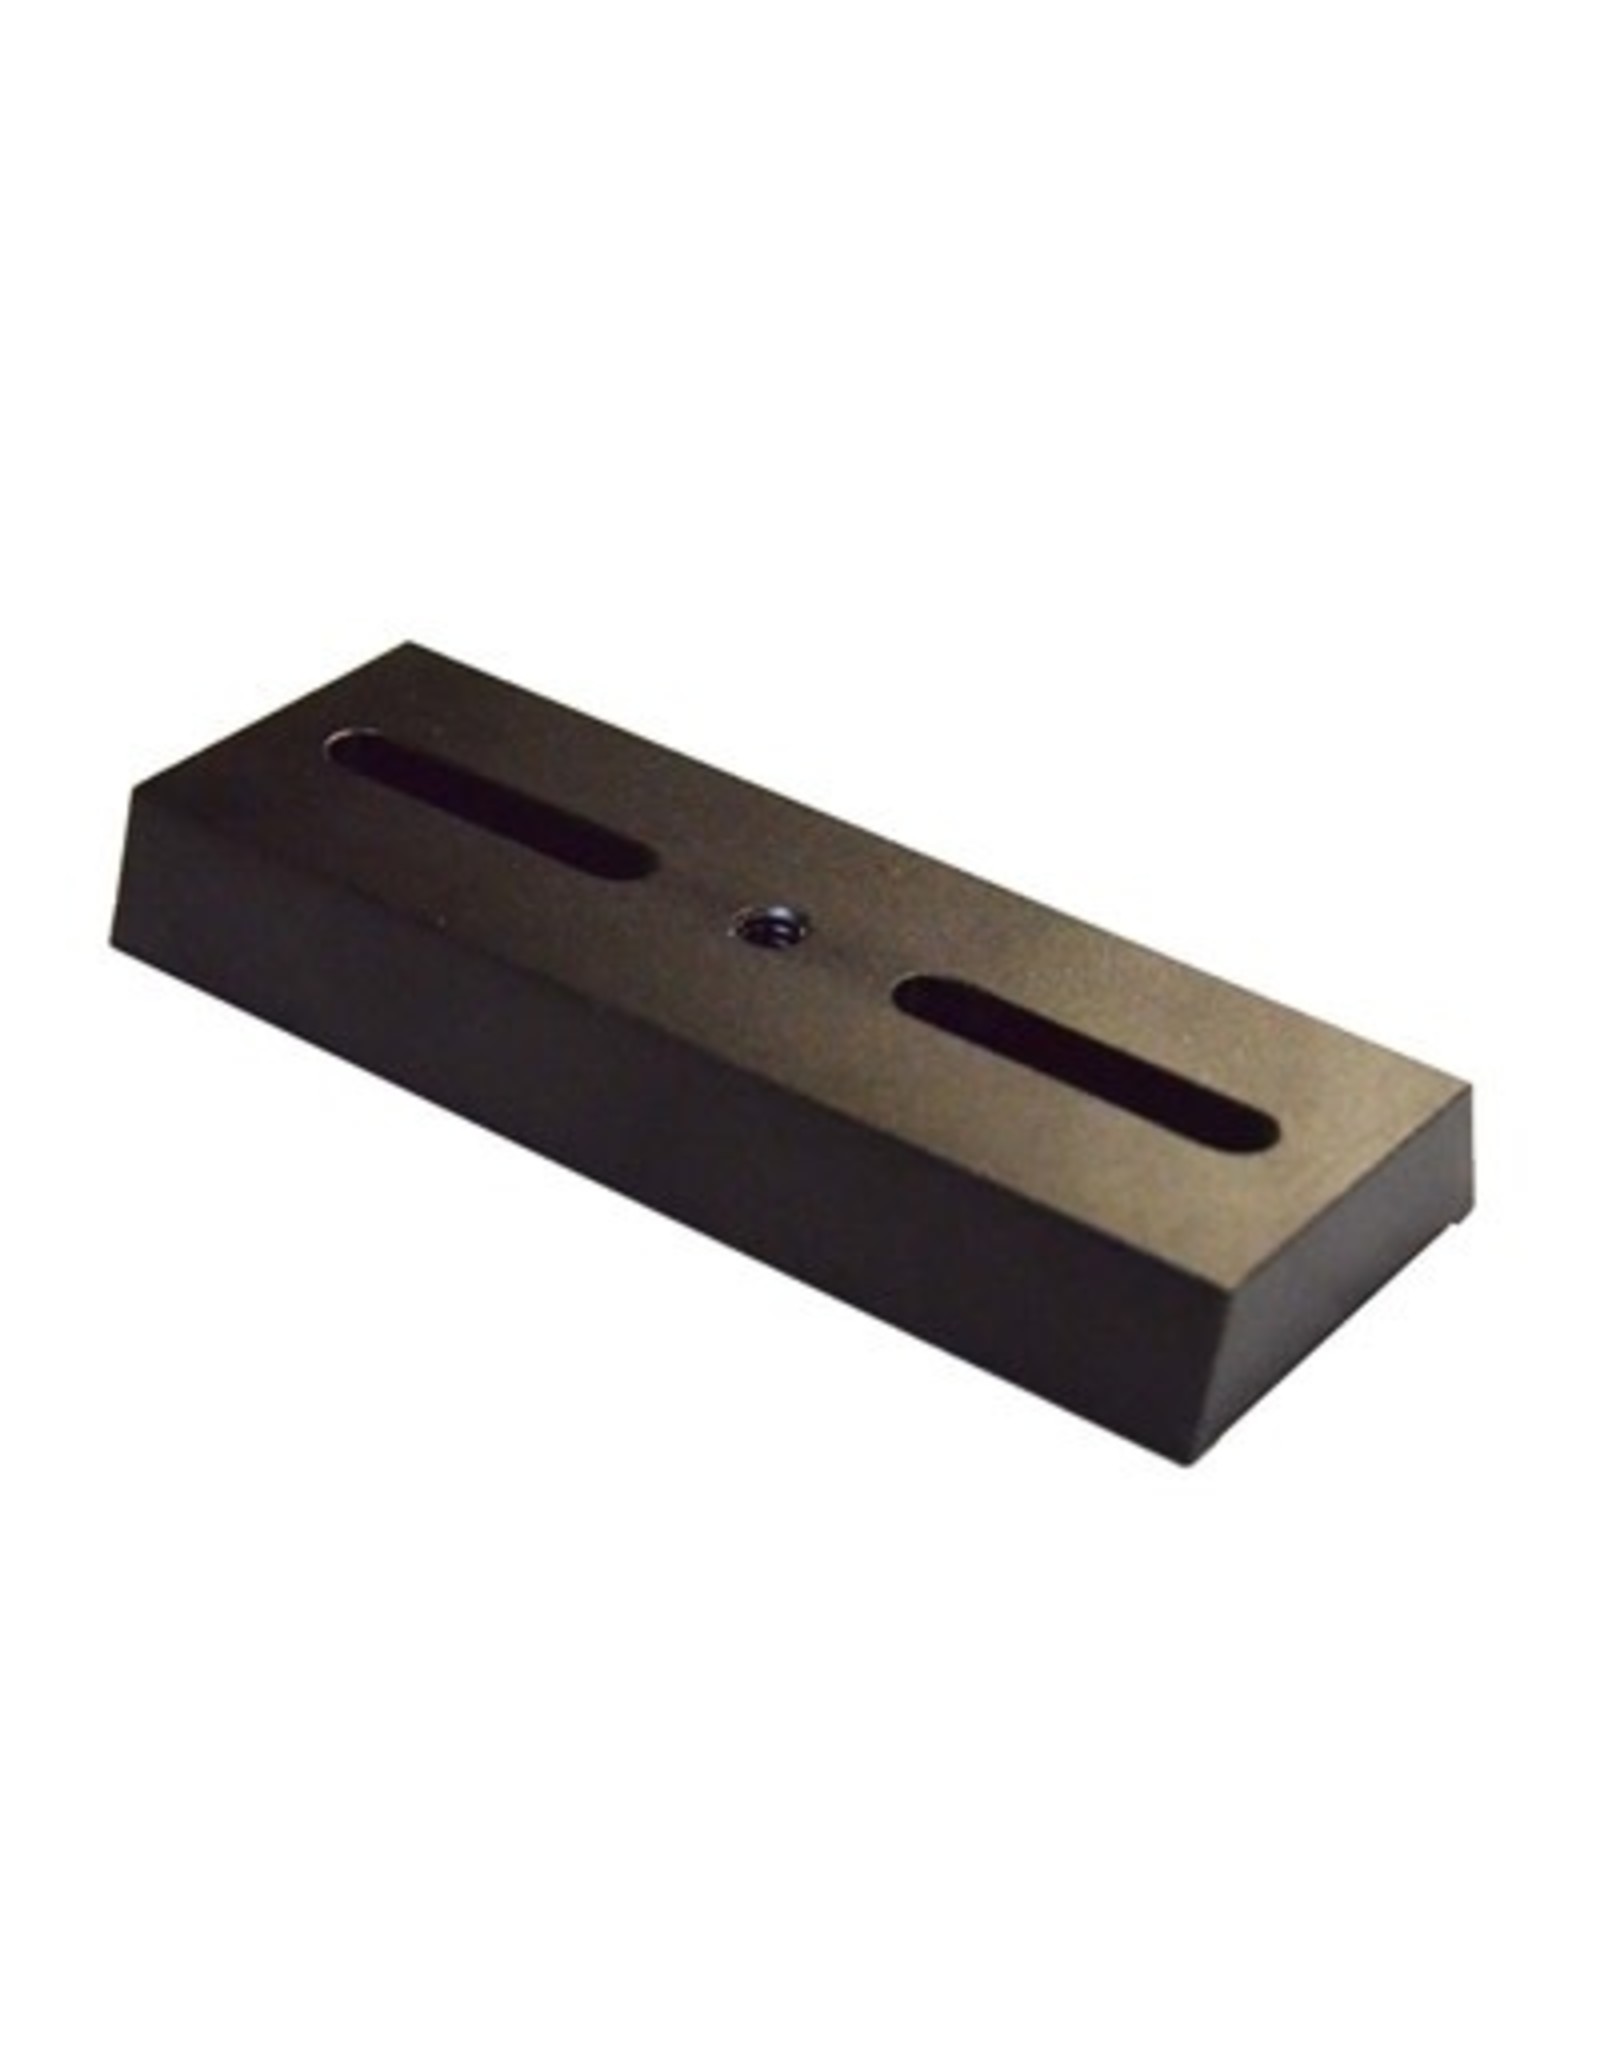 Ioptron Dovetail Plate - 115mm universal